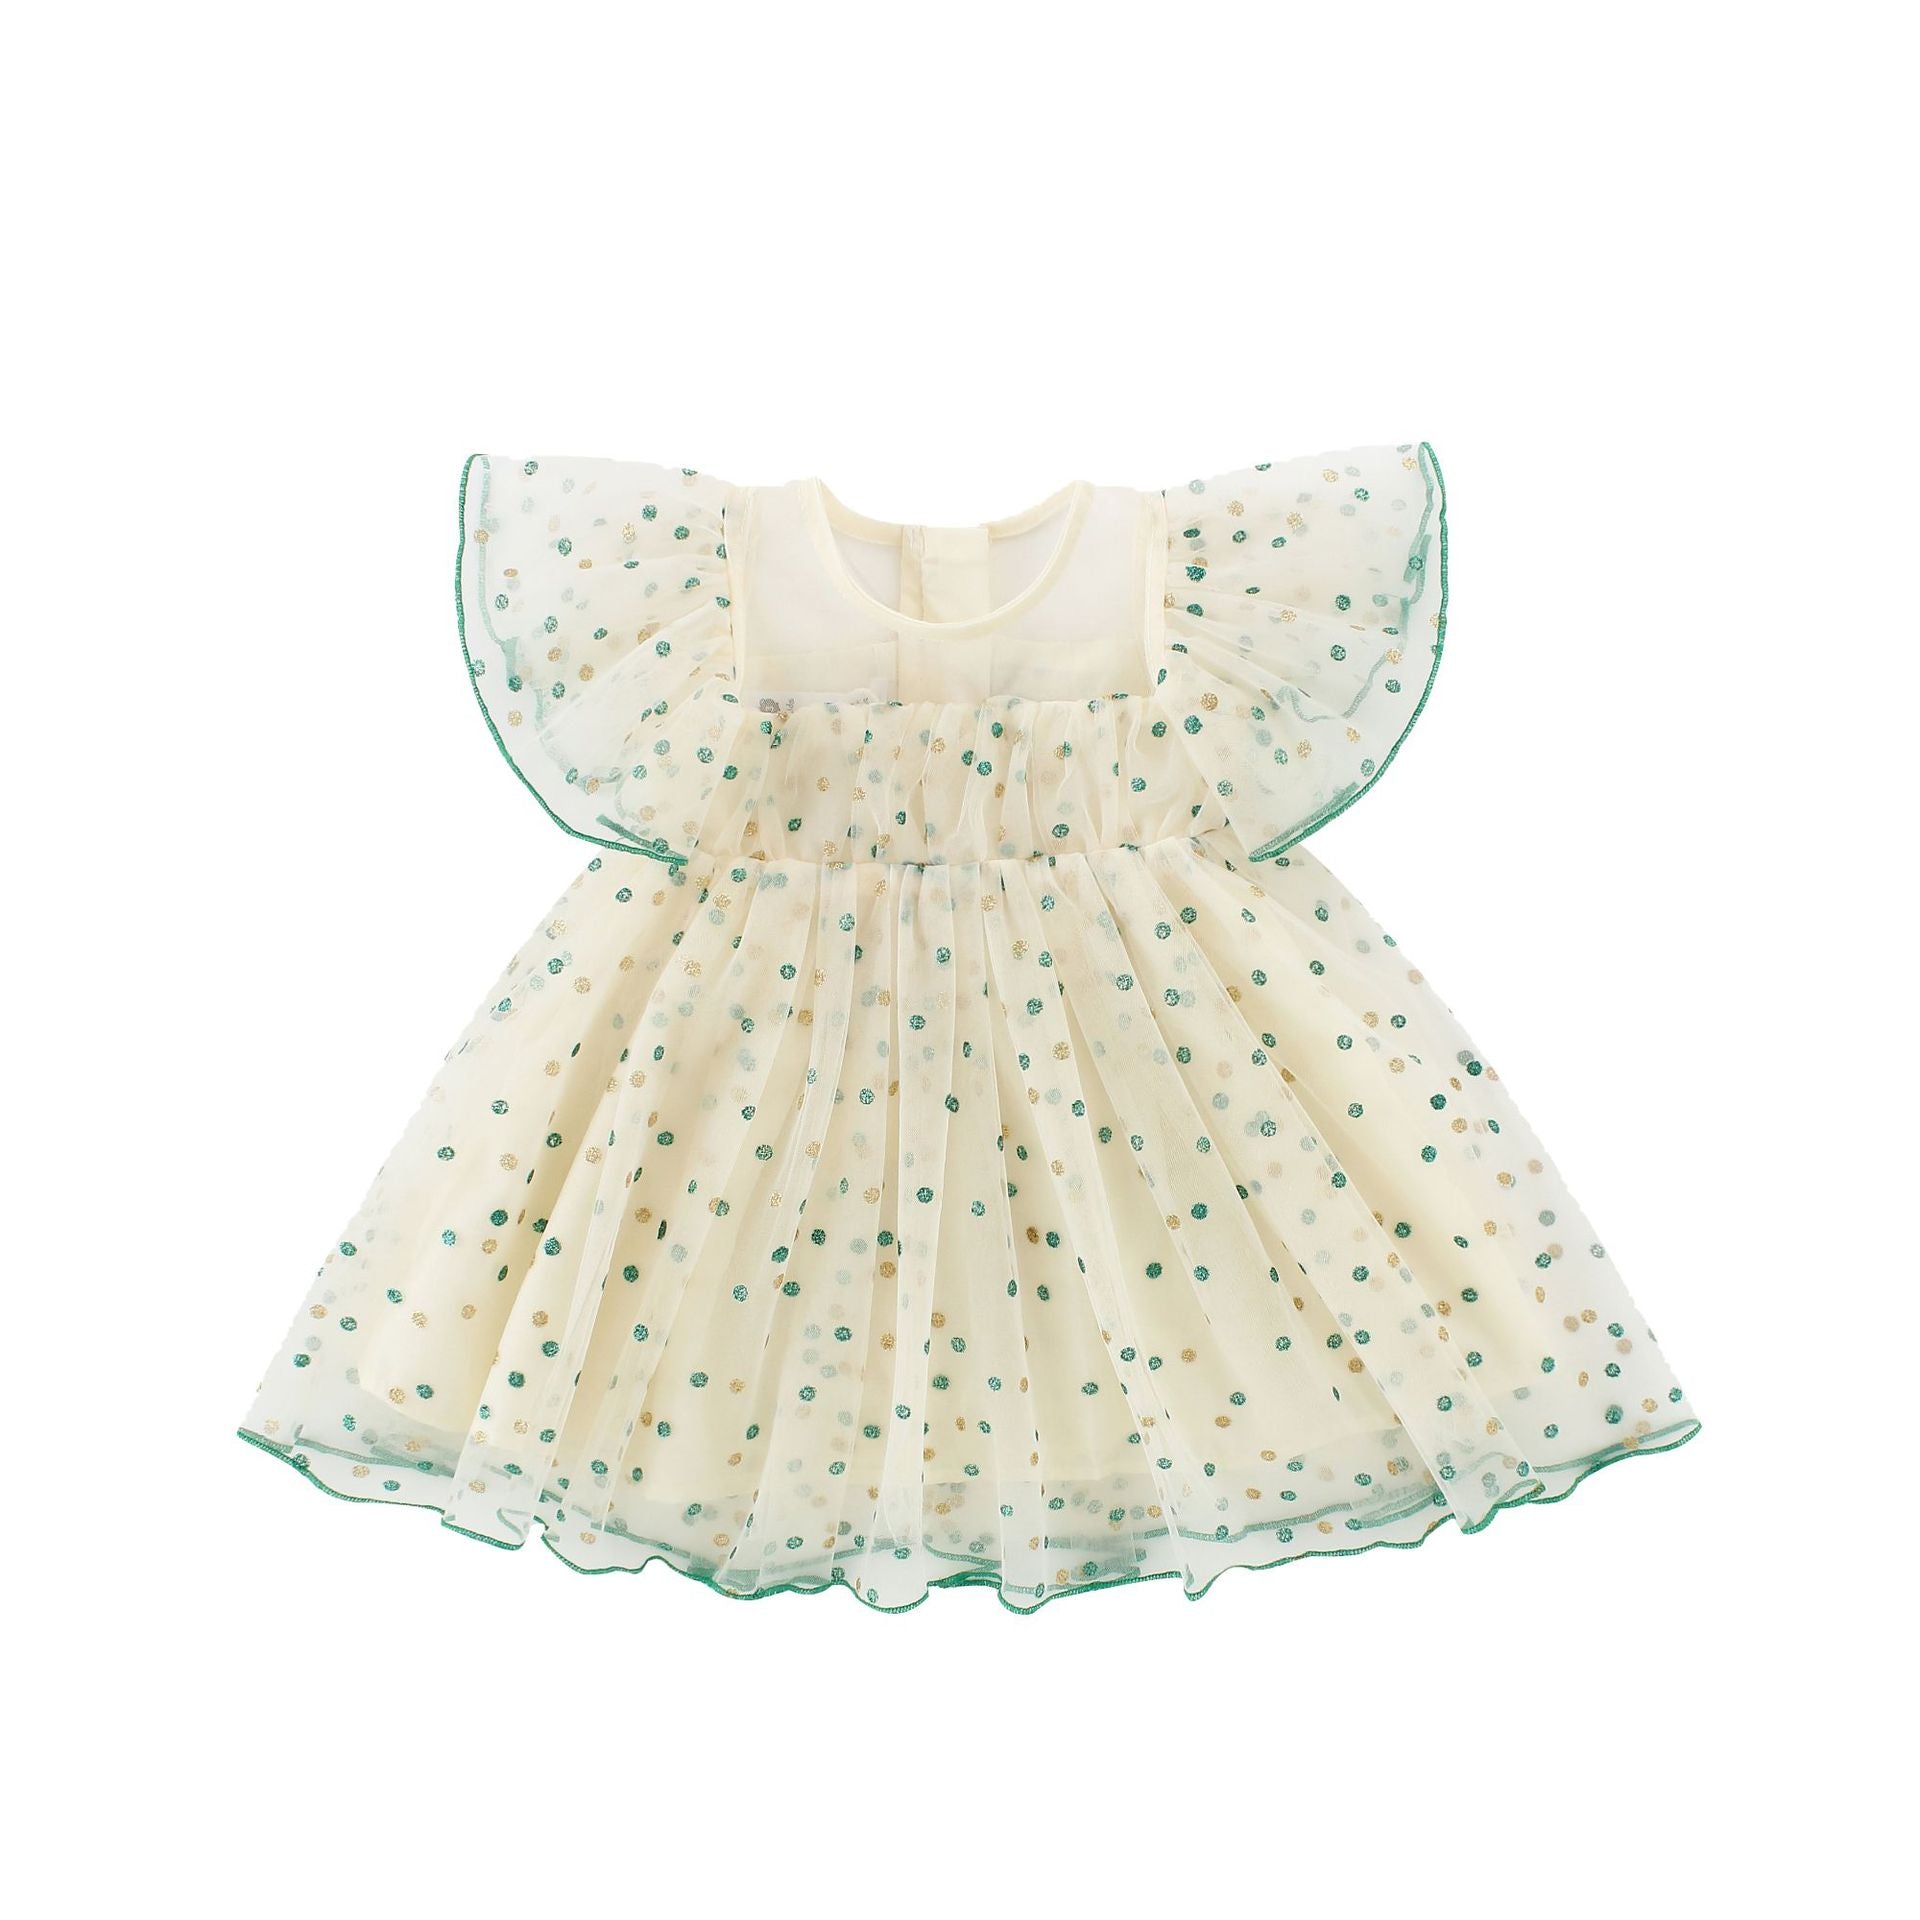 Stylish Party Romper for Girls from Eternal Gleams.